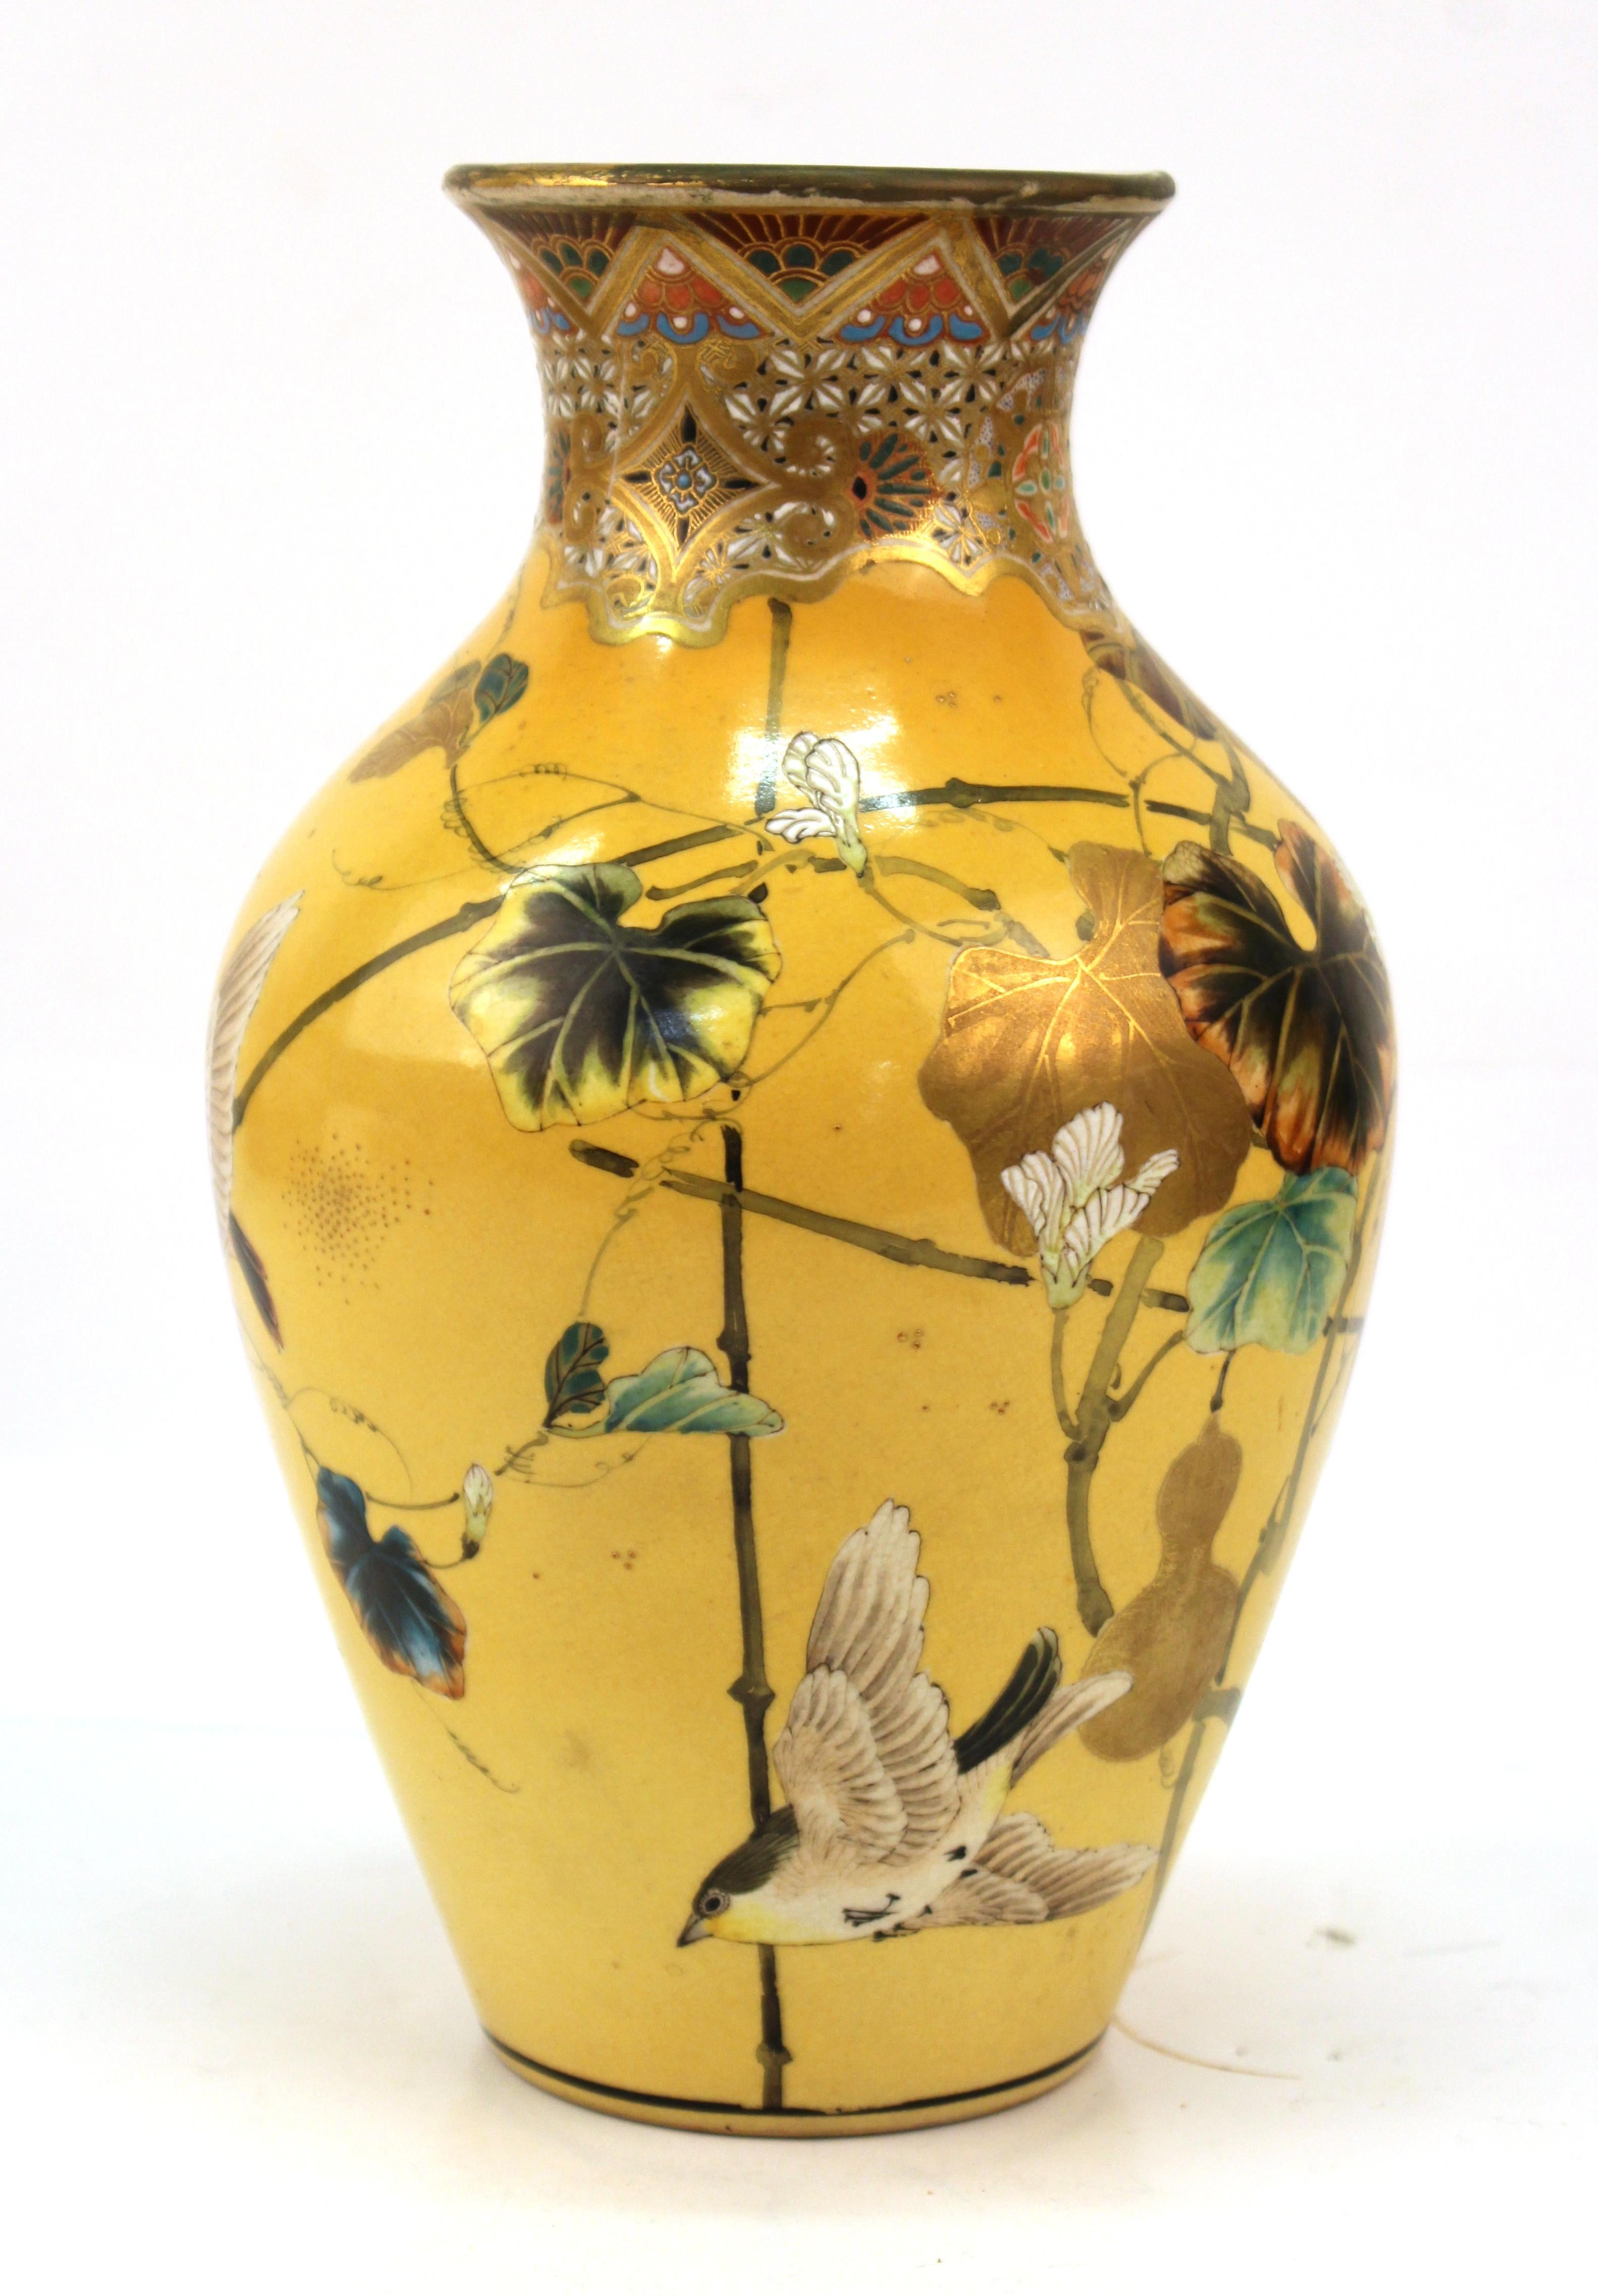 Japanese Meiji period Satsuma vase by well-known potter Taizan Yohei IX, with an over glaze enamel decor by Kono Bairei, one of the Meiji period's foremost painters. Taizan was a renowned Kyoto potter who exhibited and won prizes at a number of